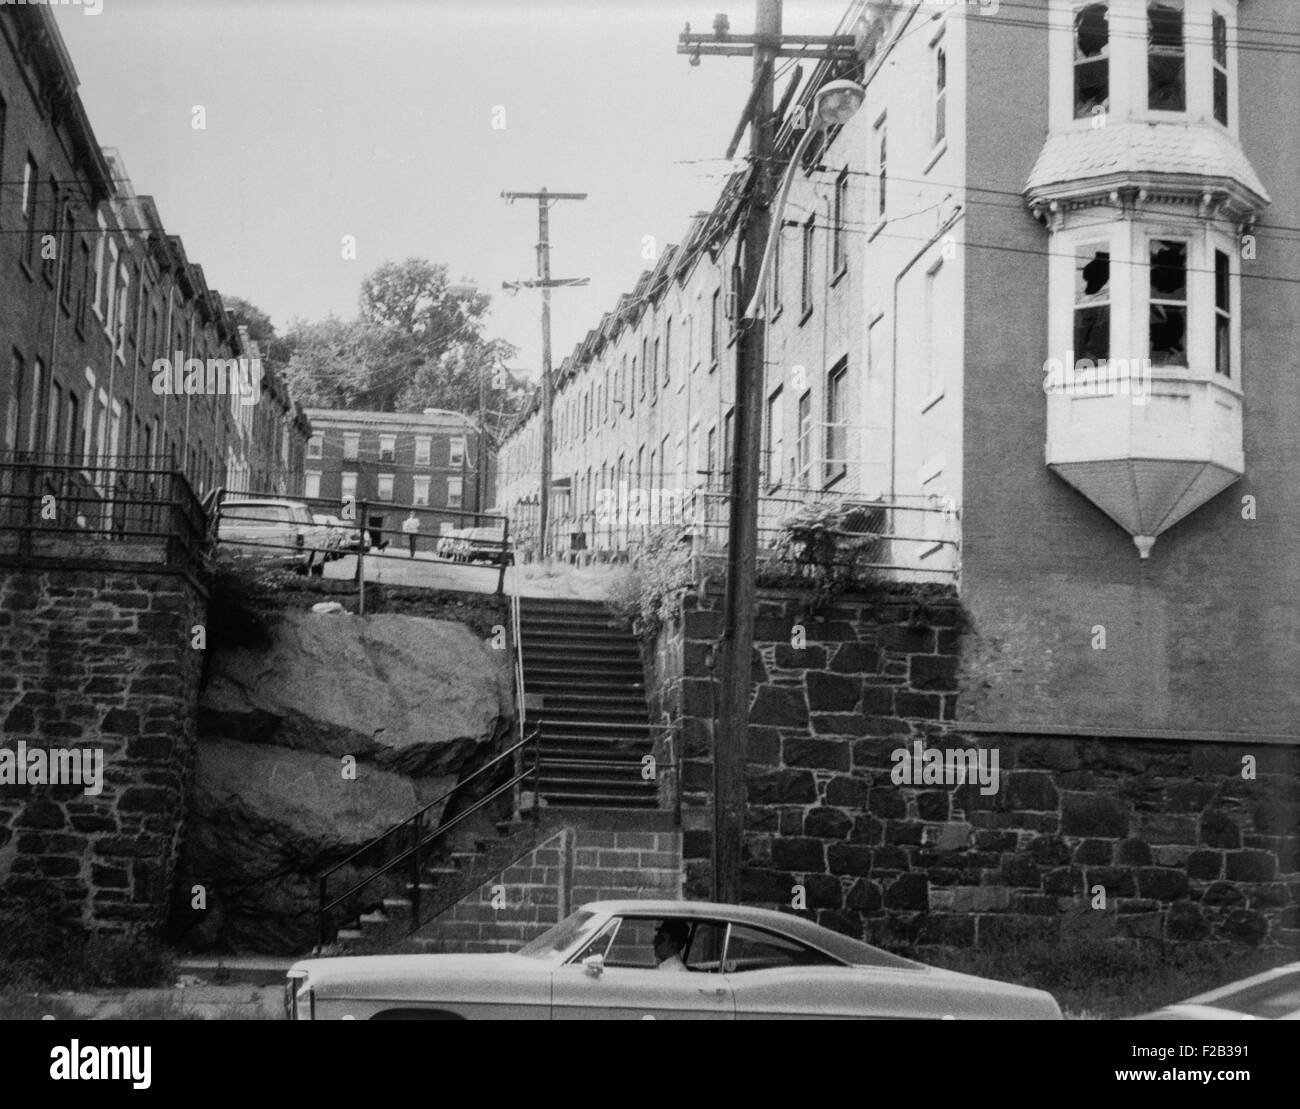 Yonkers, New York, ca. 1980. Moquette Row Housing, are 18th century industrial housing built for workers of Moquette Textile Mills in the 1880's. View west showing front elevation and original end structures. Westchester County, NY. (BSLOC_2015_11_10) Stock Photo